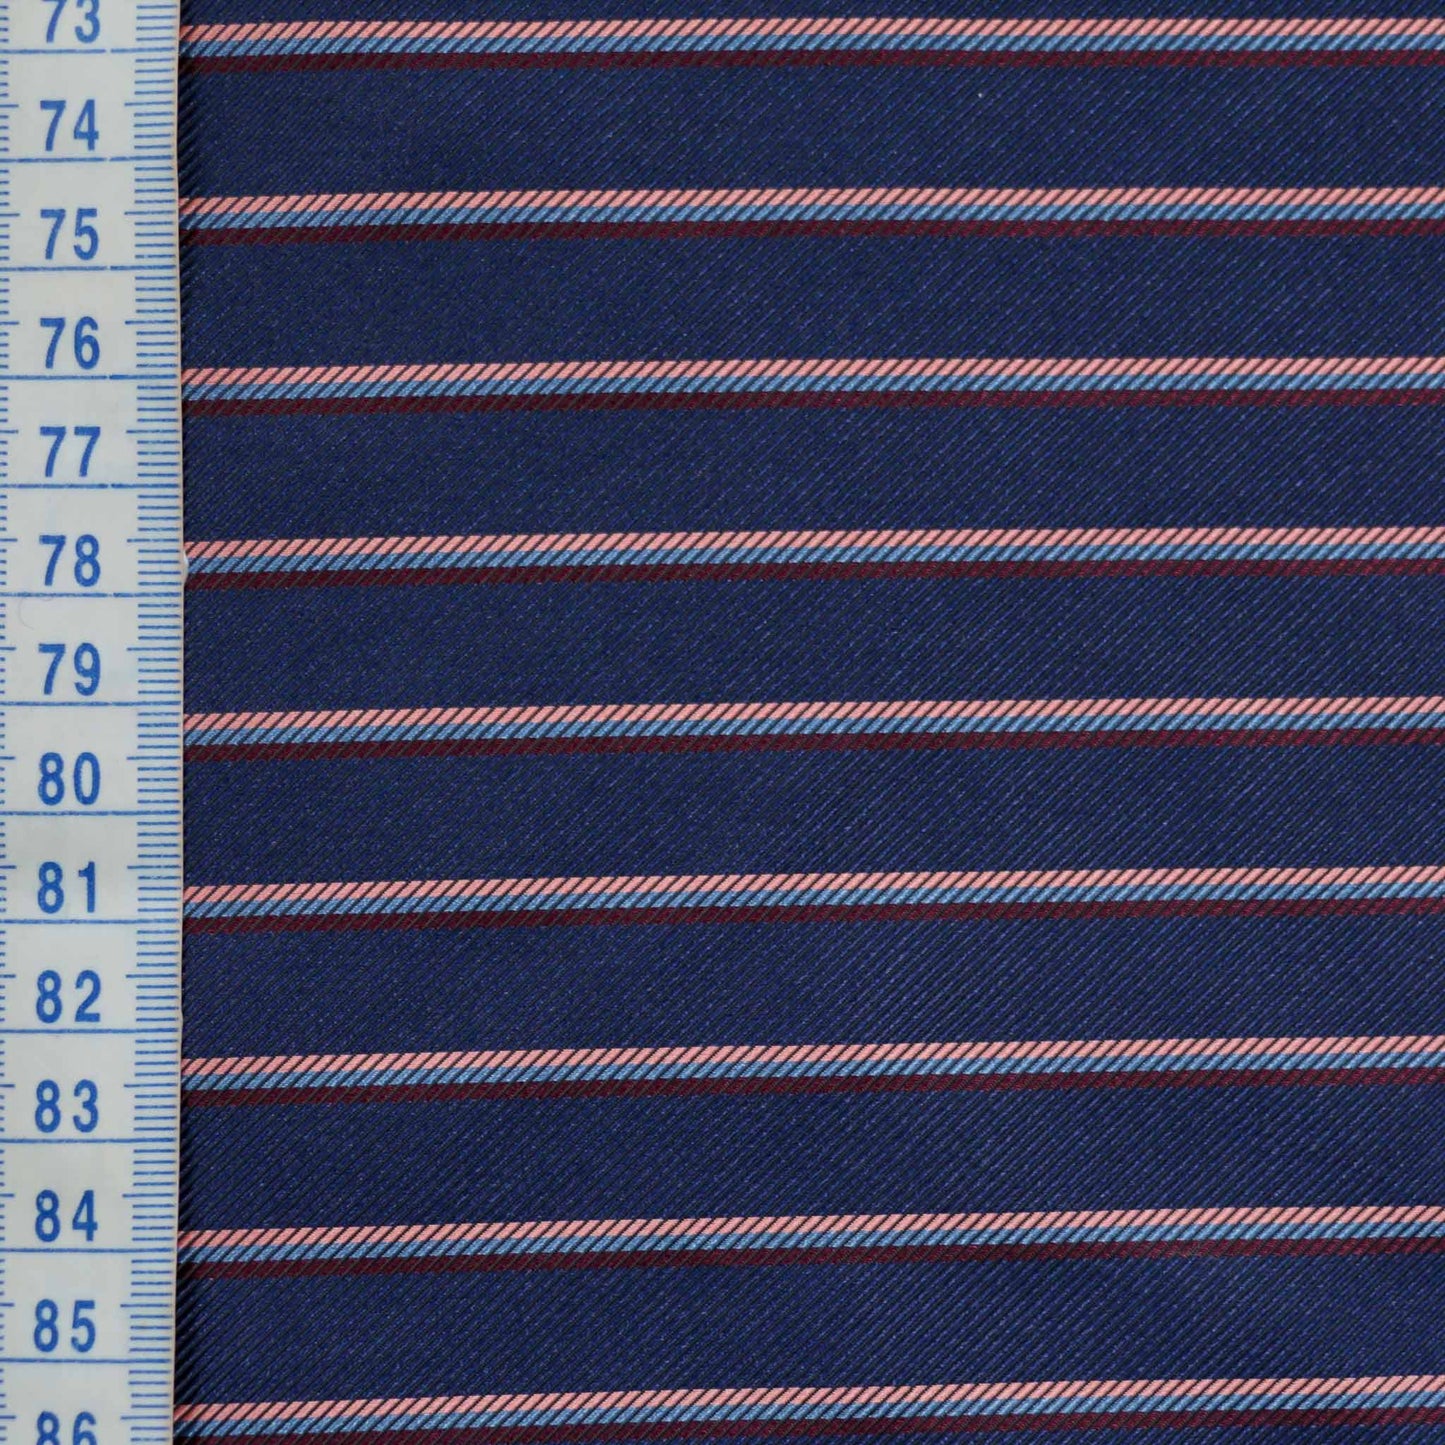 metre twill lining viscose dressmaking lining fabric in navy with pink and maroon striped design